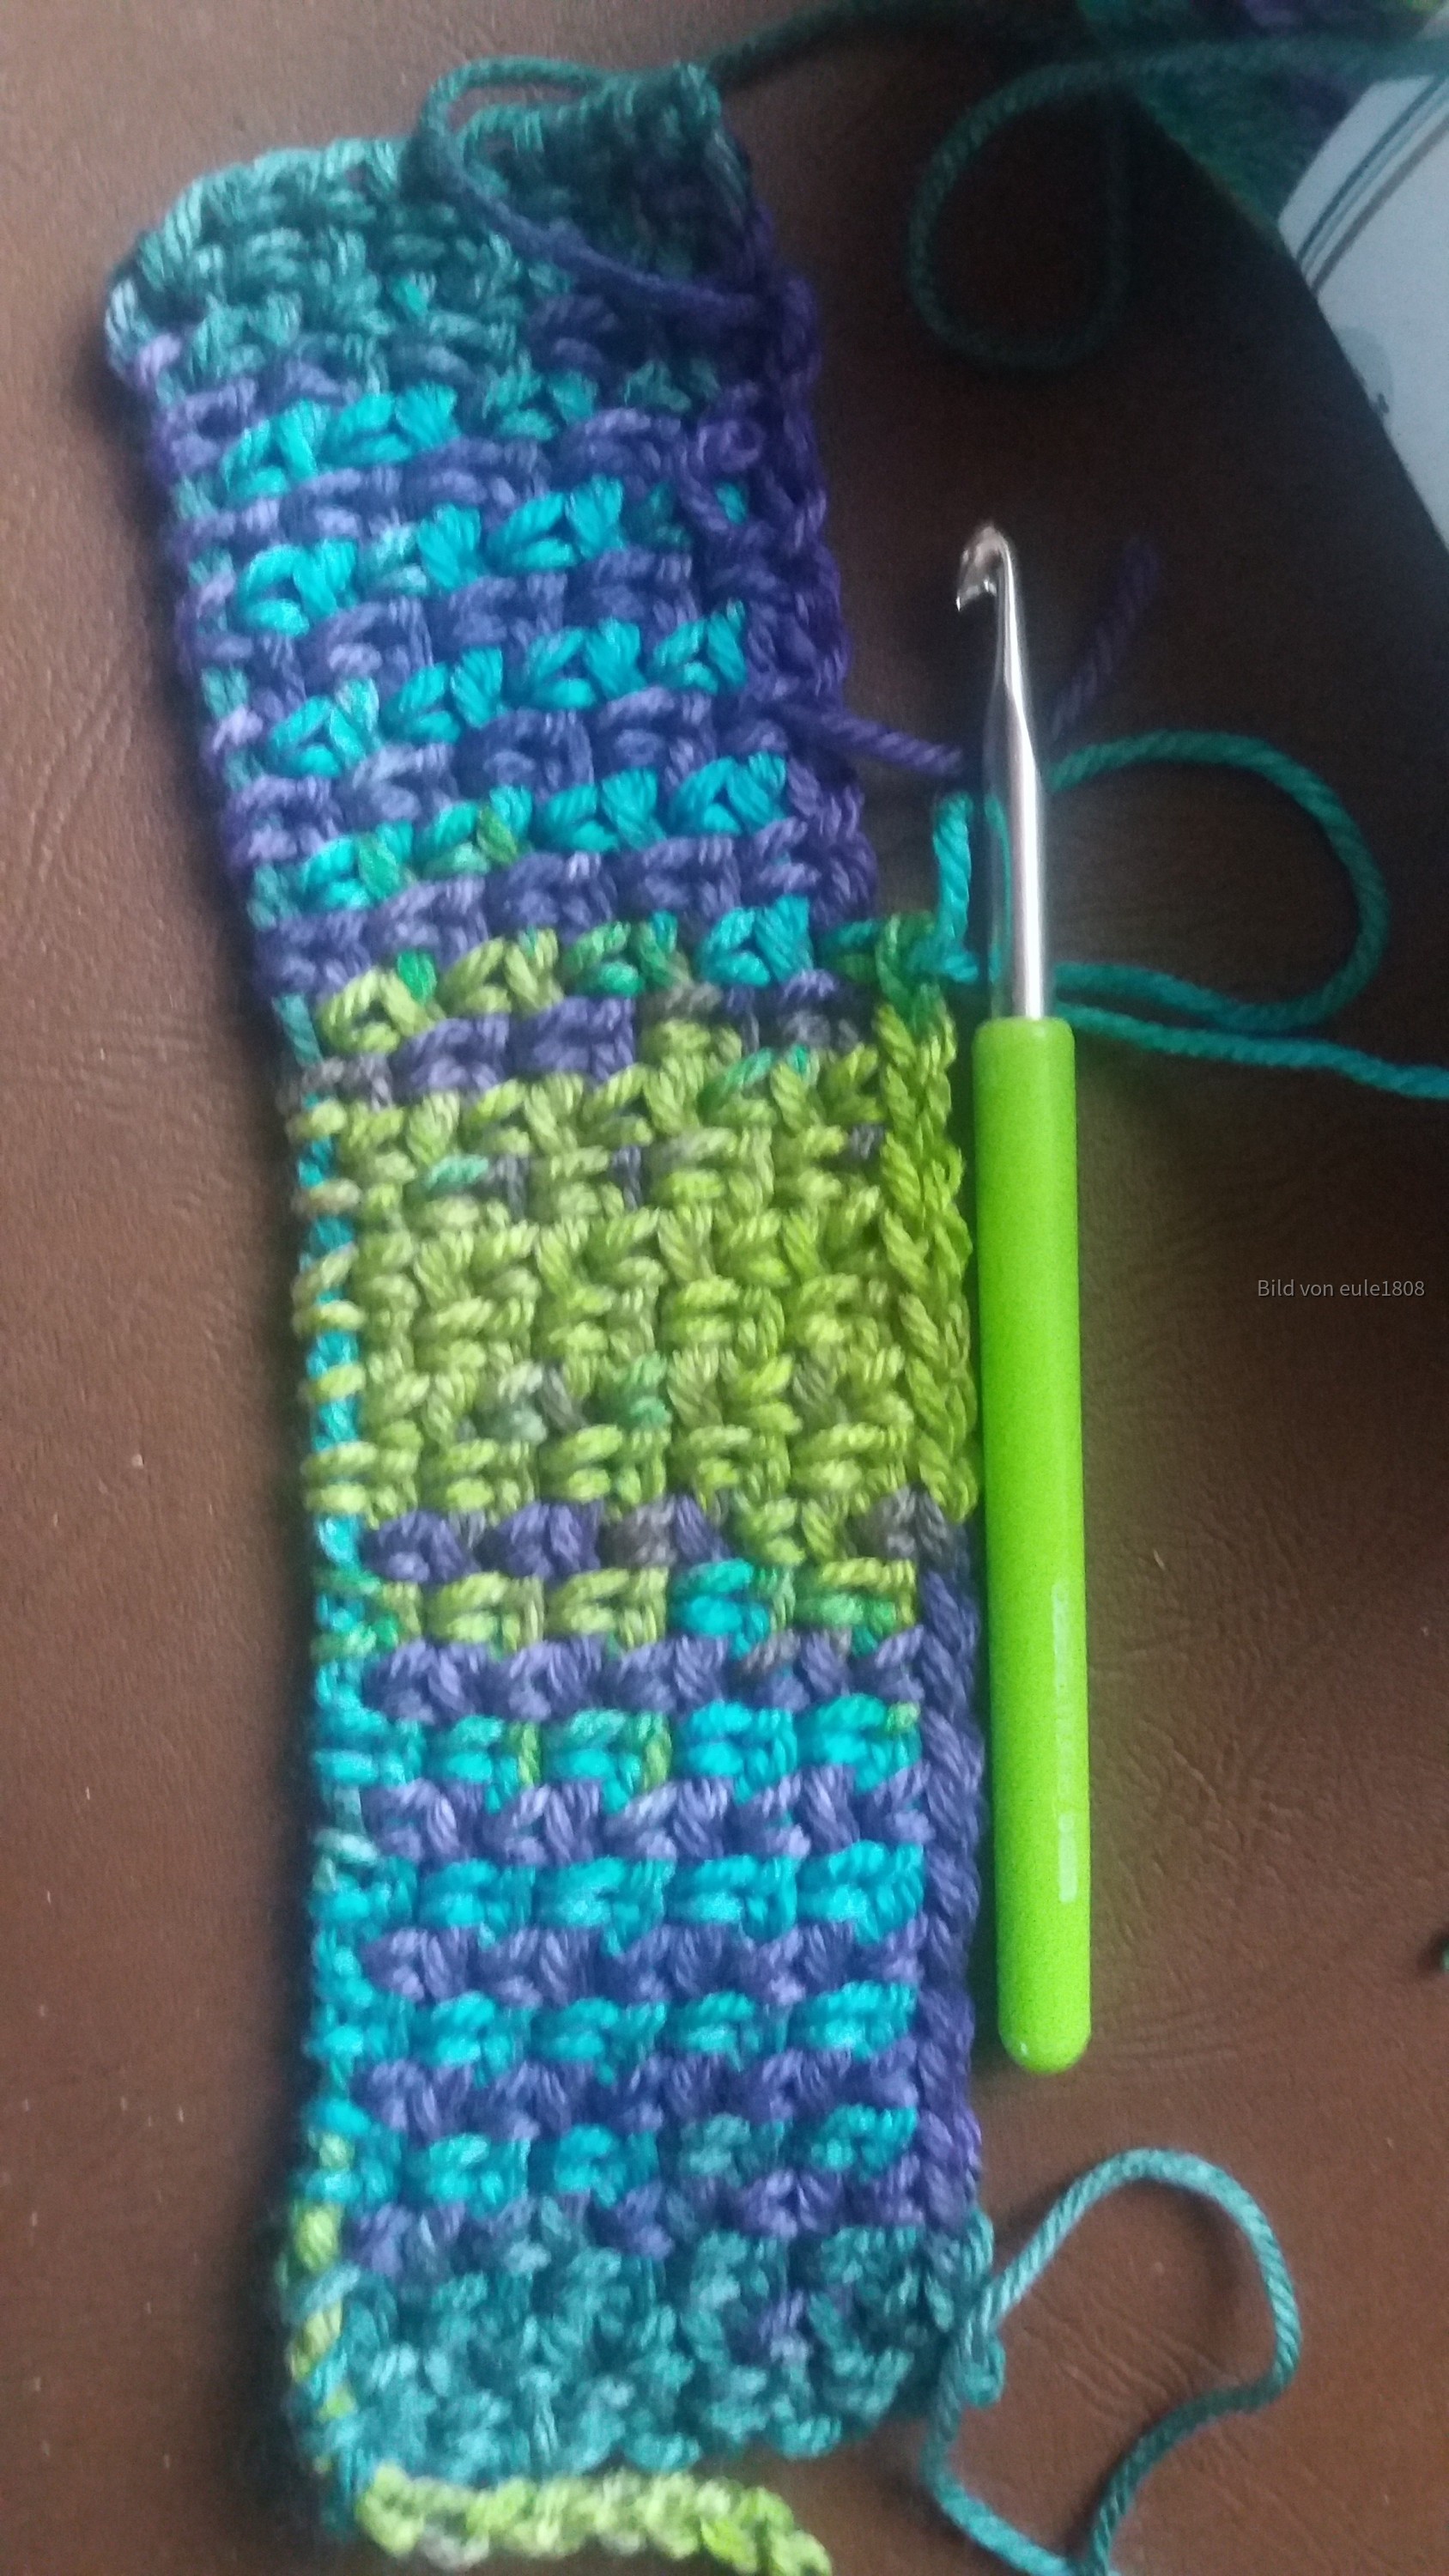 Planned Pooling mit NS 6